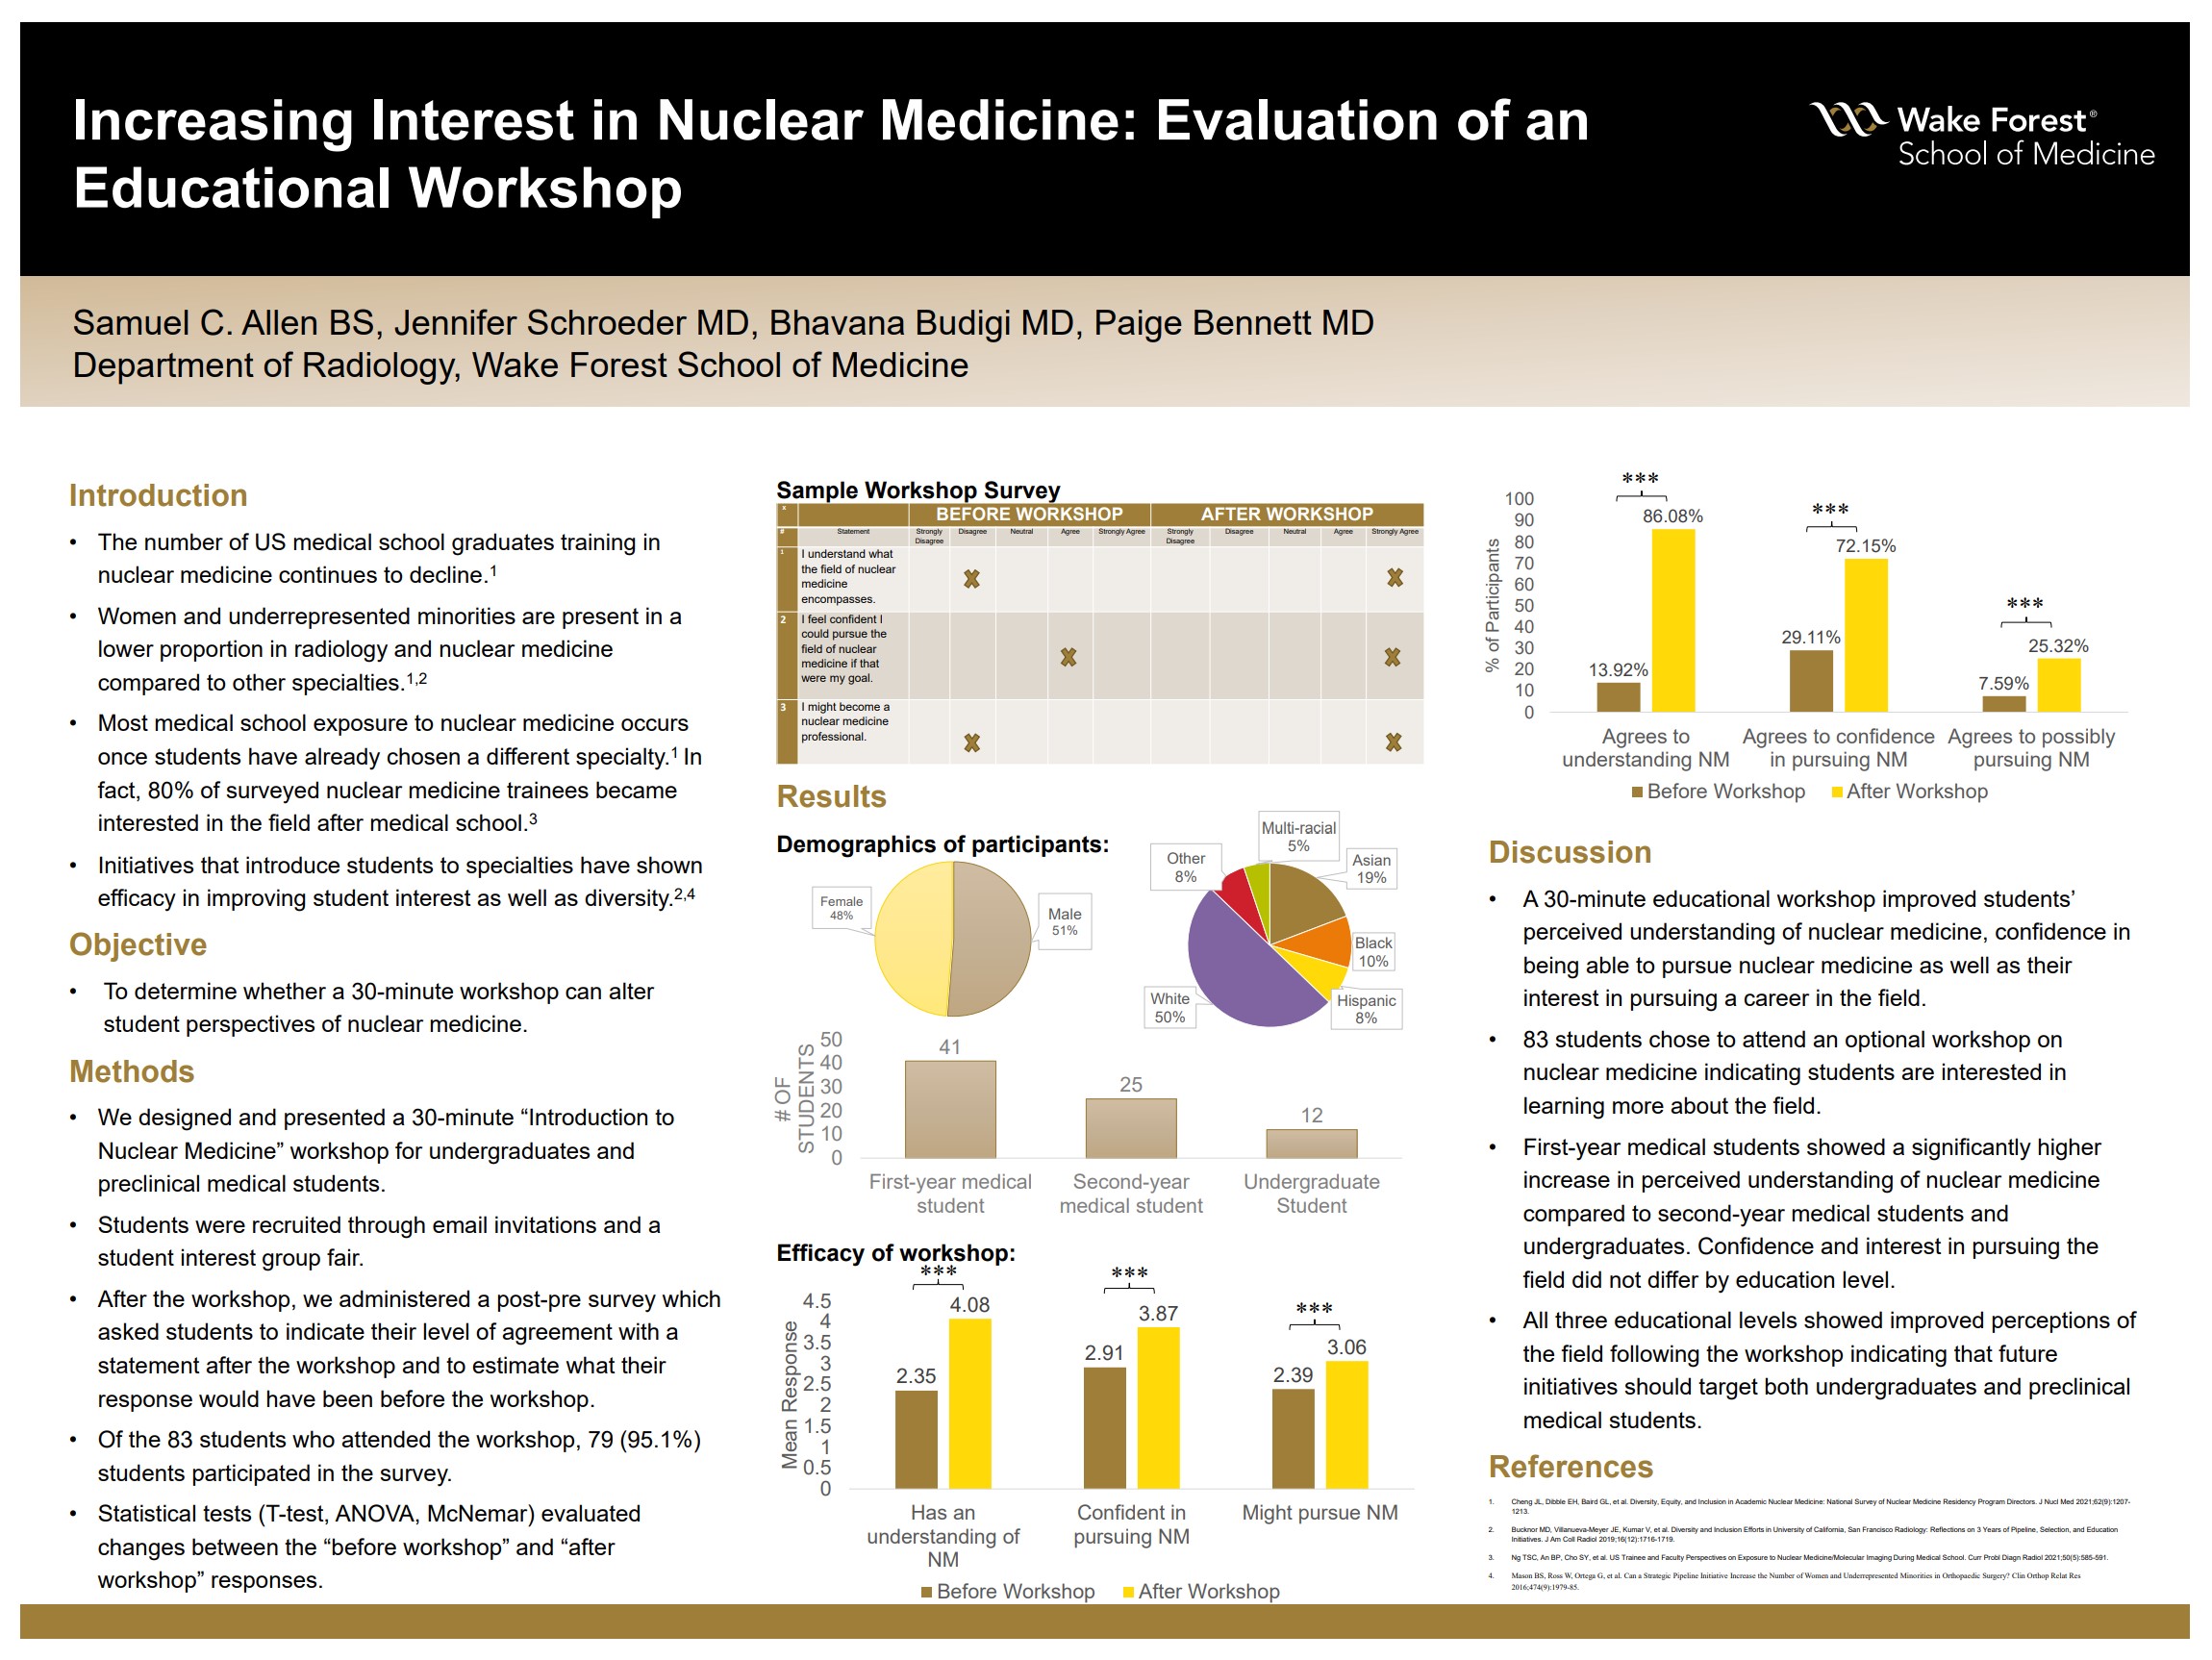 Showcase Image for Increasing Interest in Nuclear Medicine: Evaluation of an Educational Workshop